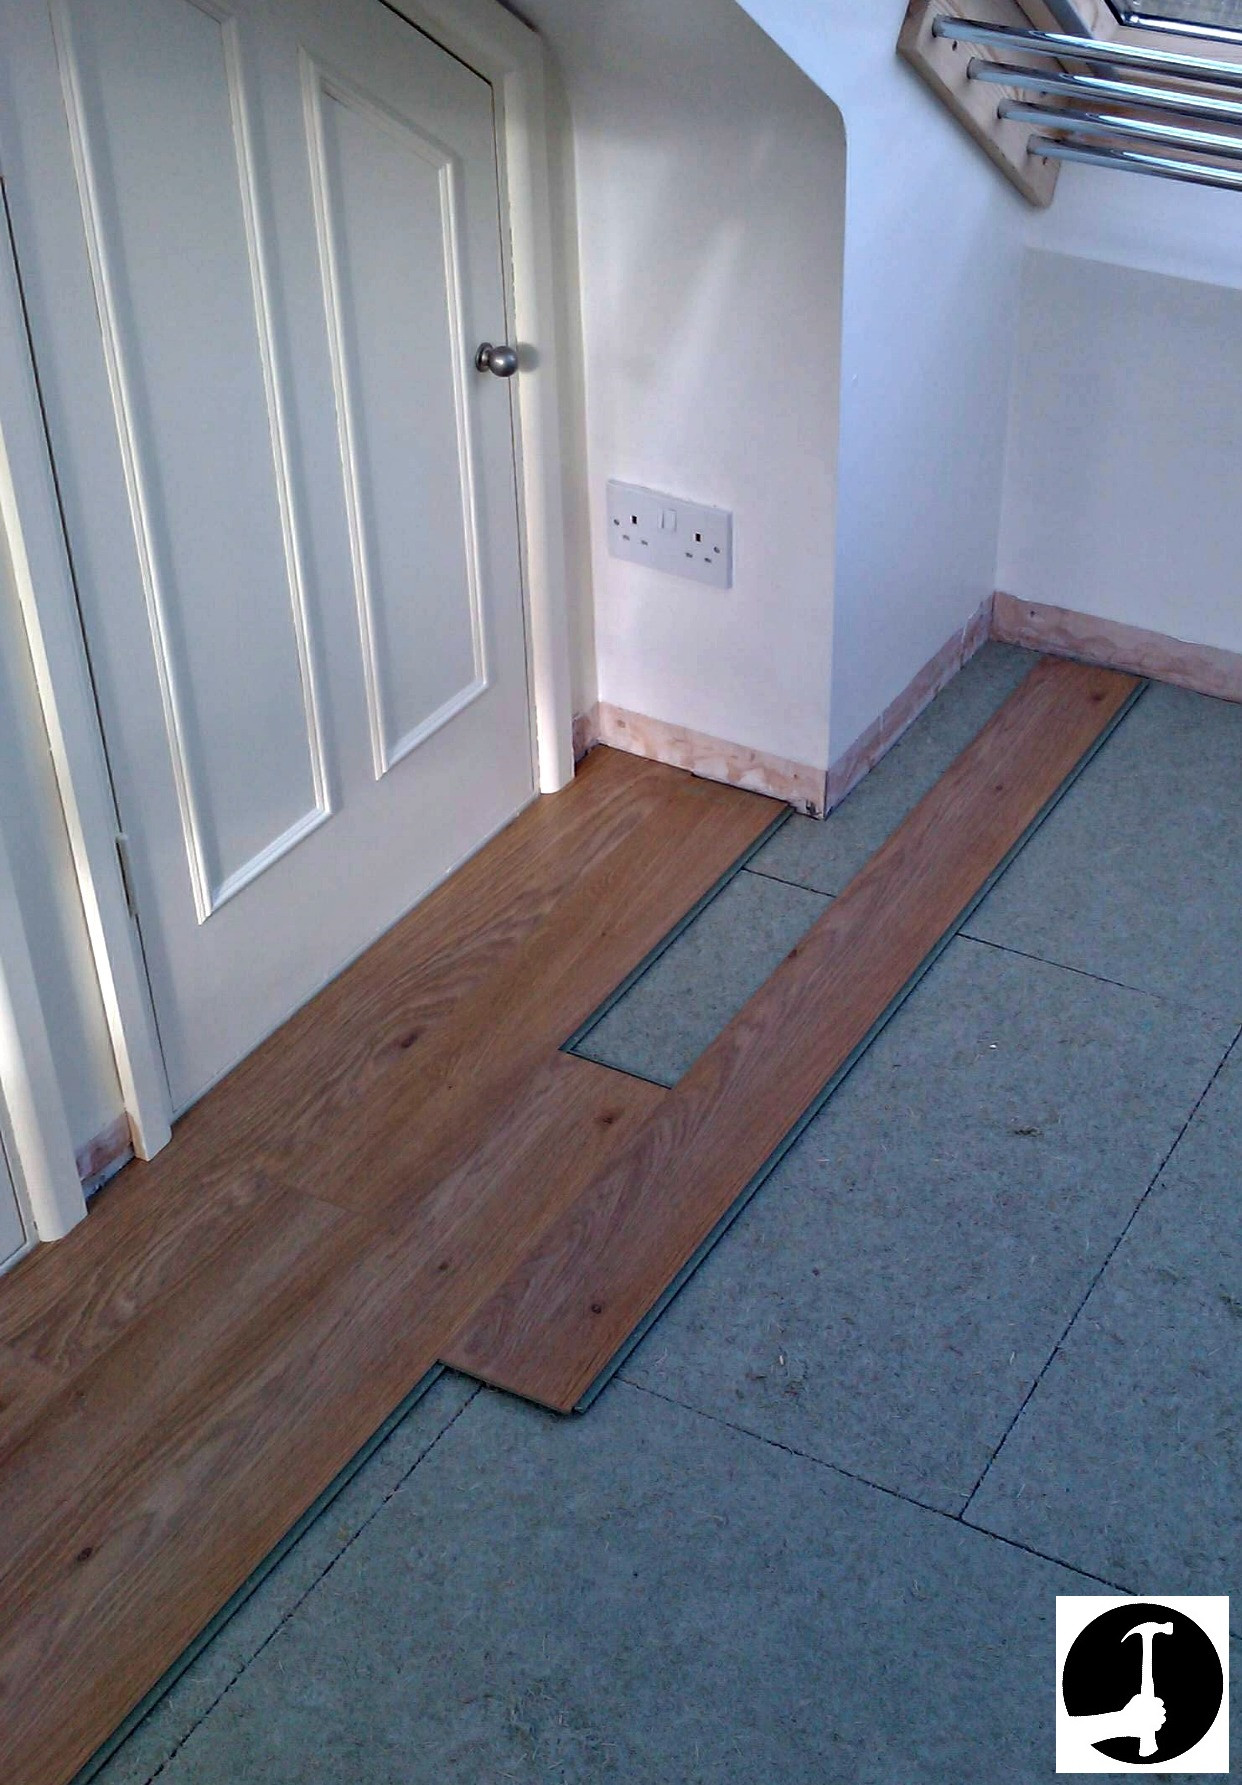 28 Ideal Diy Hardwood Floor Installation Video 2024 free download diy hardwood floor installation video of how to install laminate flooring with ease glued glue less systems inside setting out laminate flooring